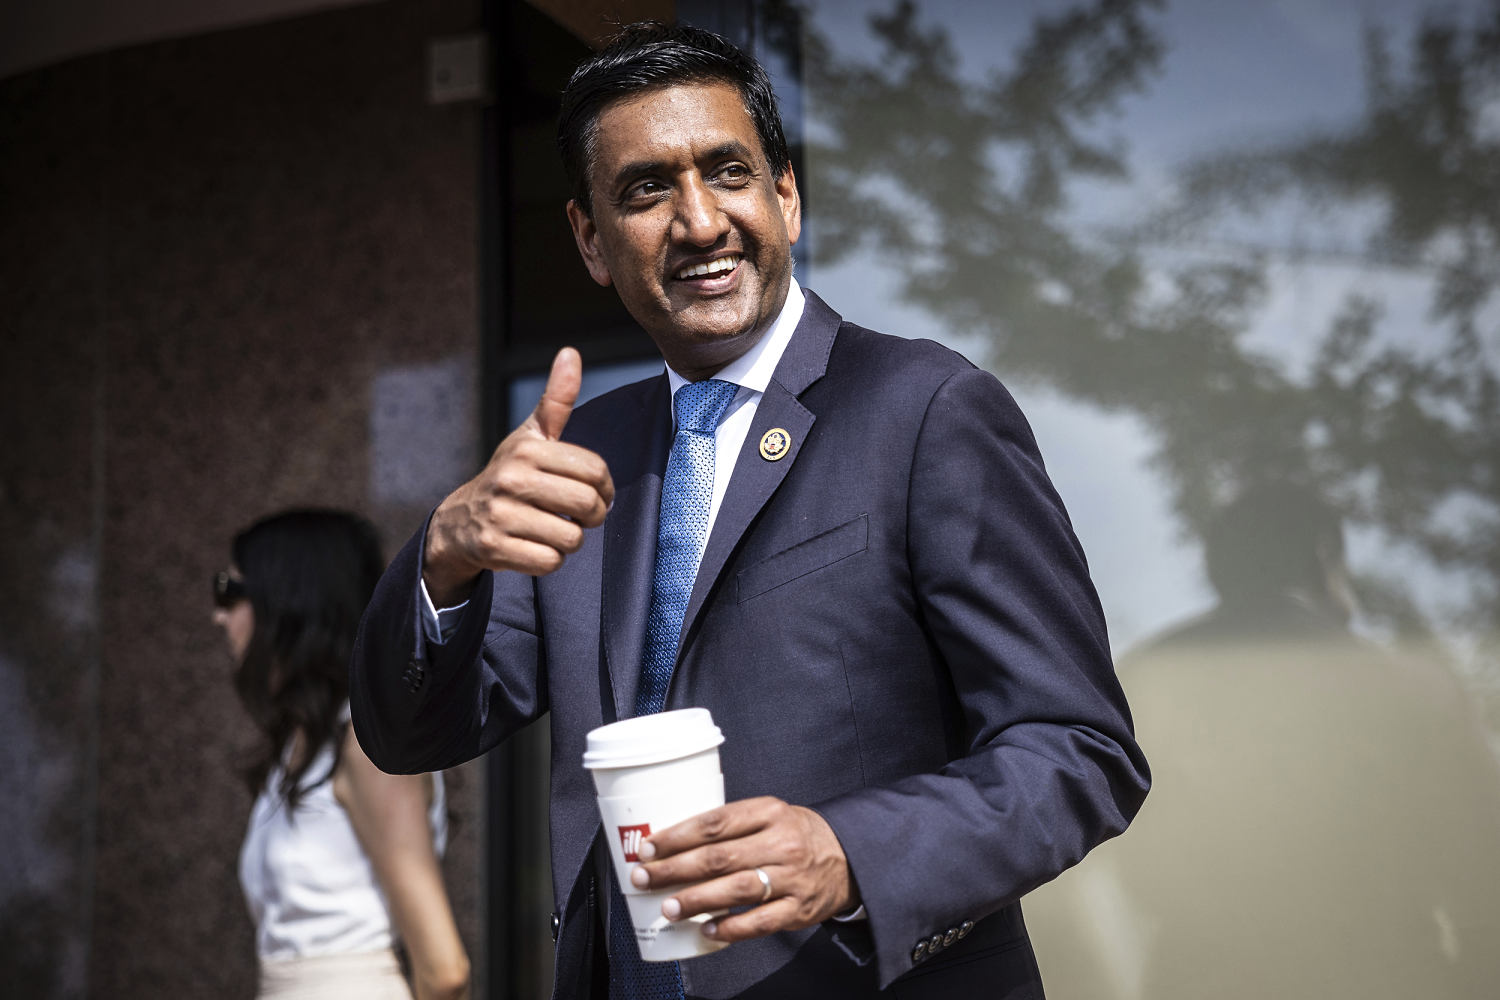 Progressive Rep. Ro Khanna tours steel and coal towns with an eye on higher office